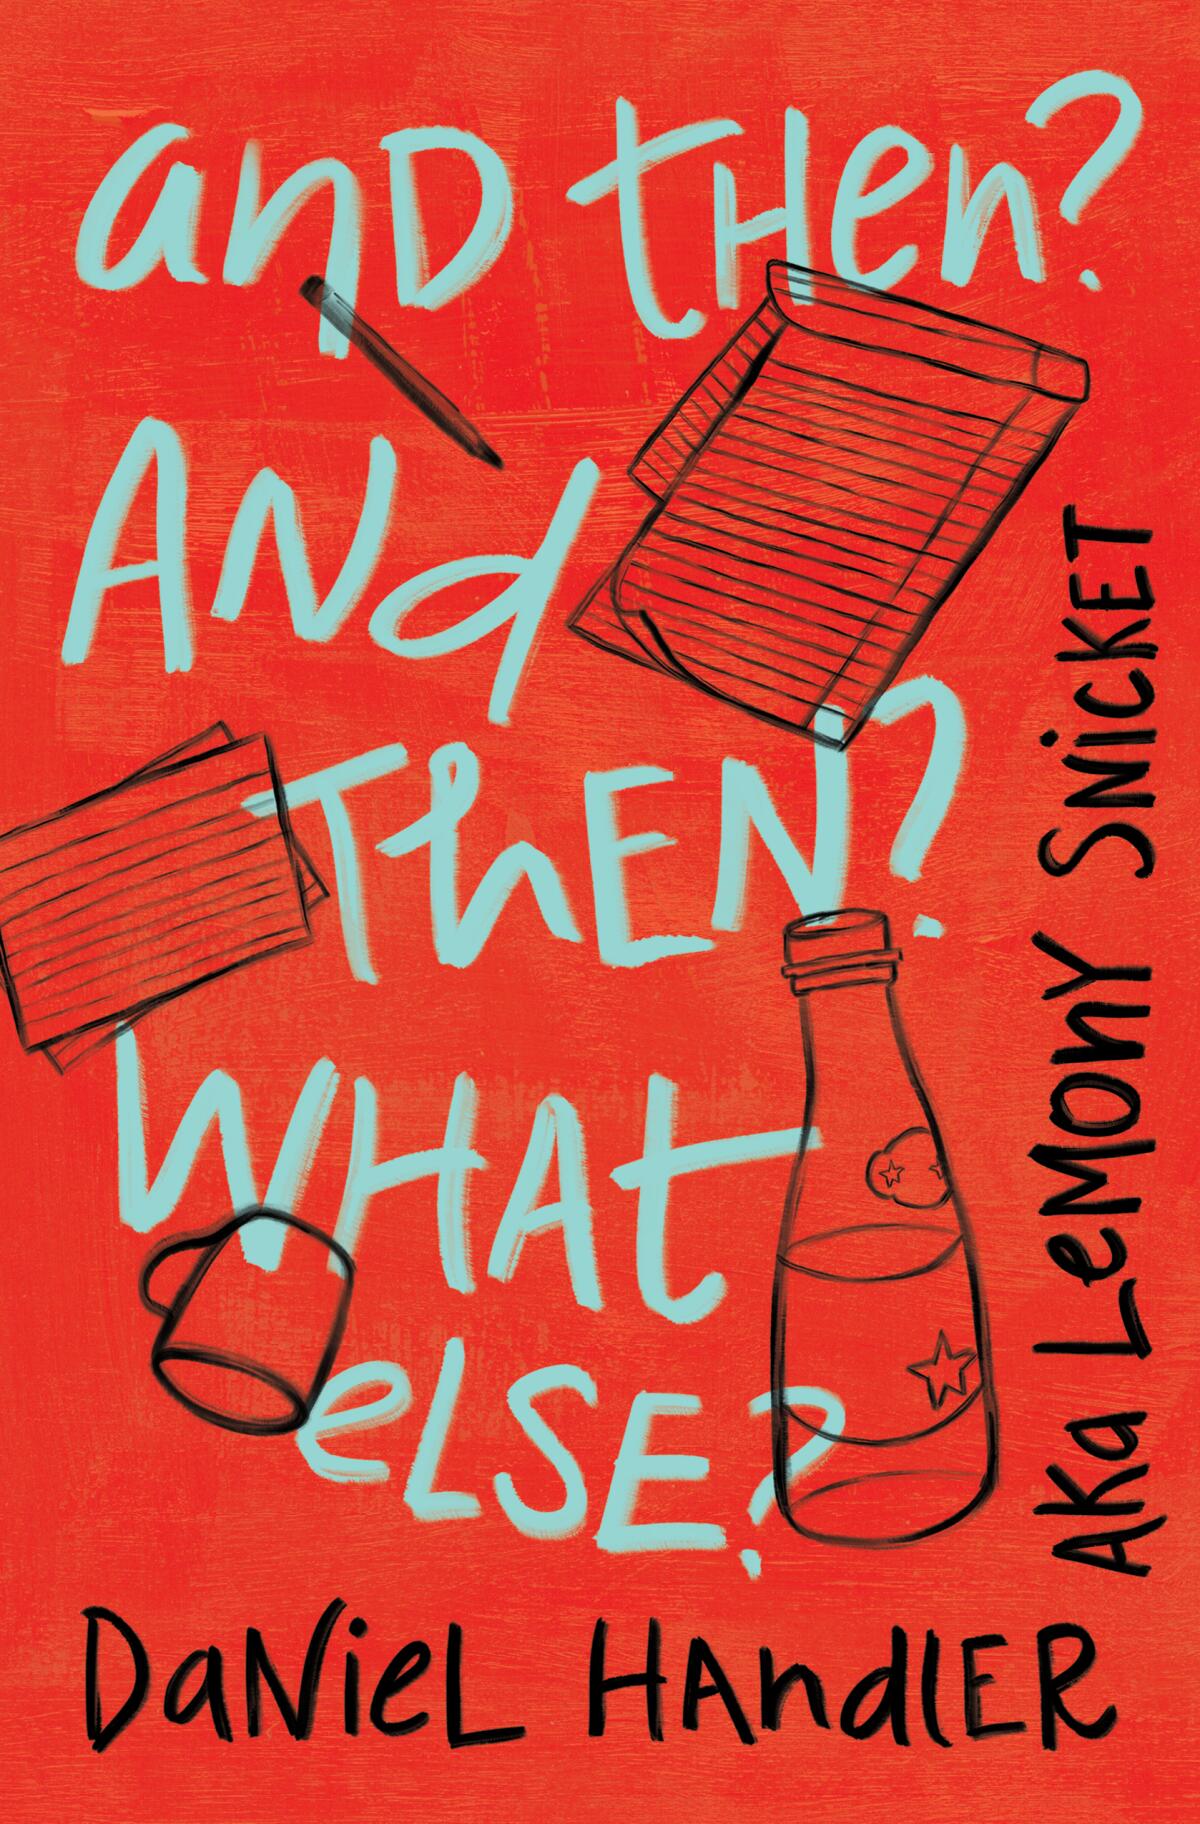 Book cover for "And Then? And Then? What Else?"